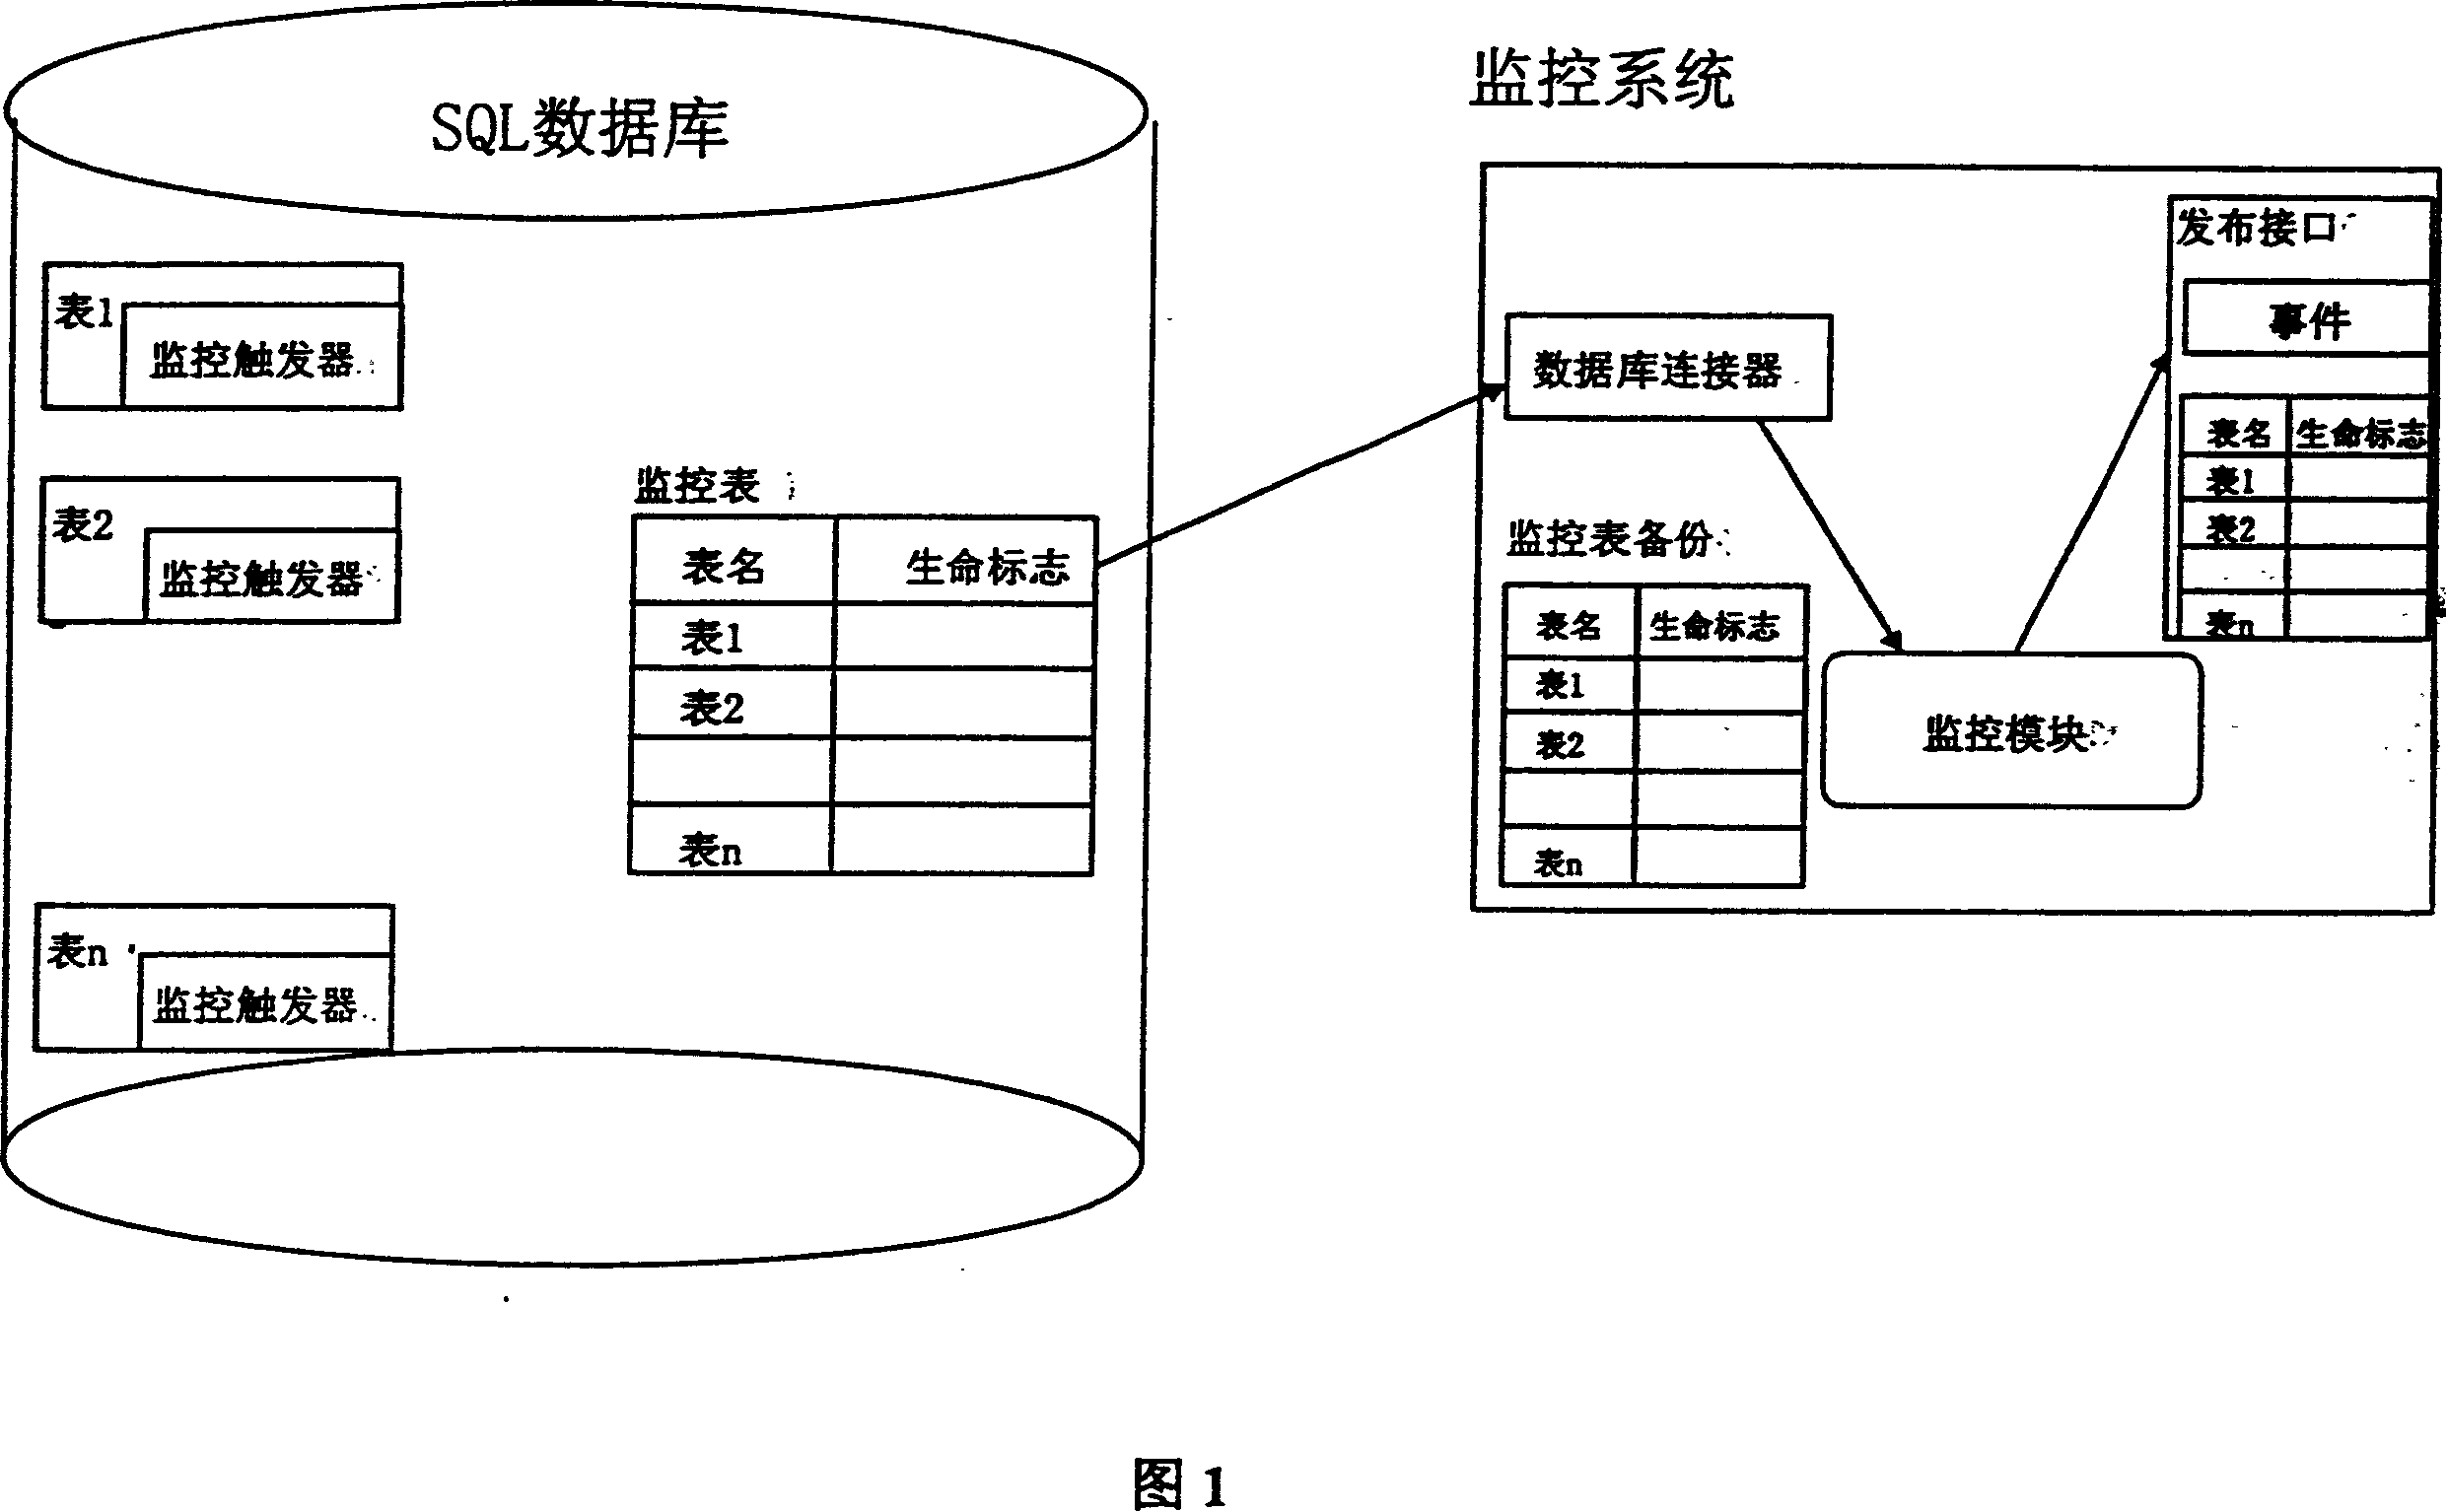 Dynamic monitoring system and method for data base list update